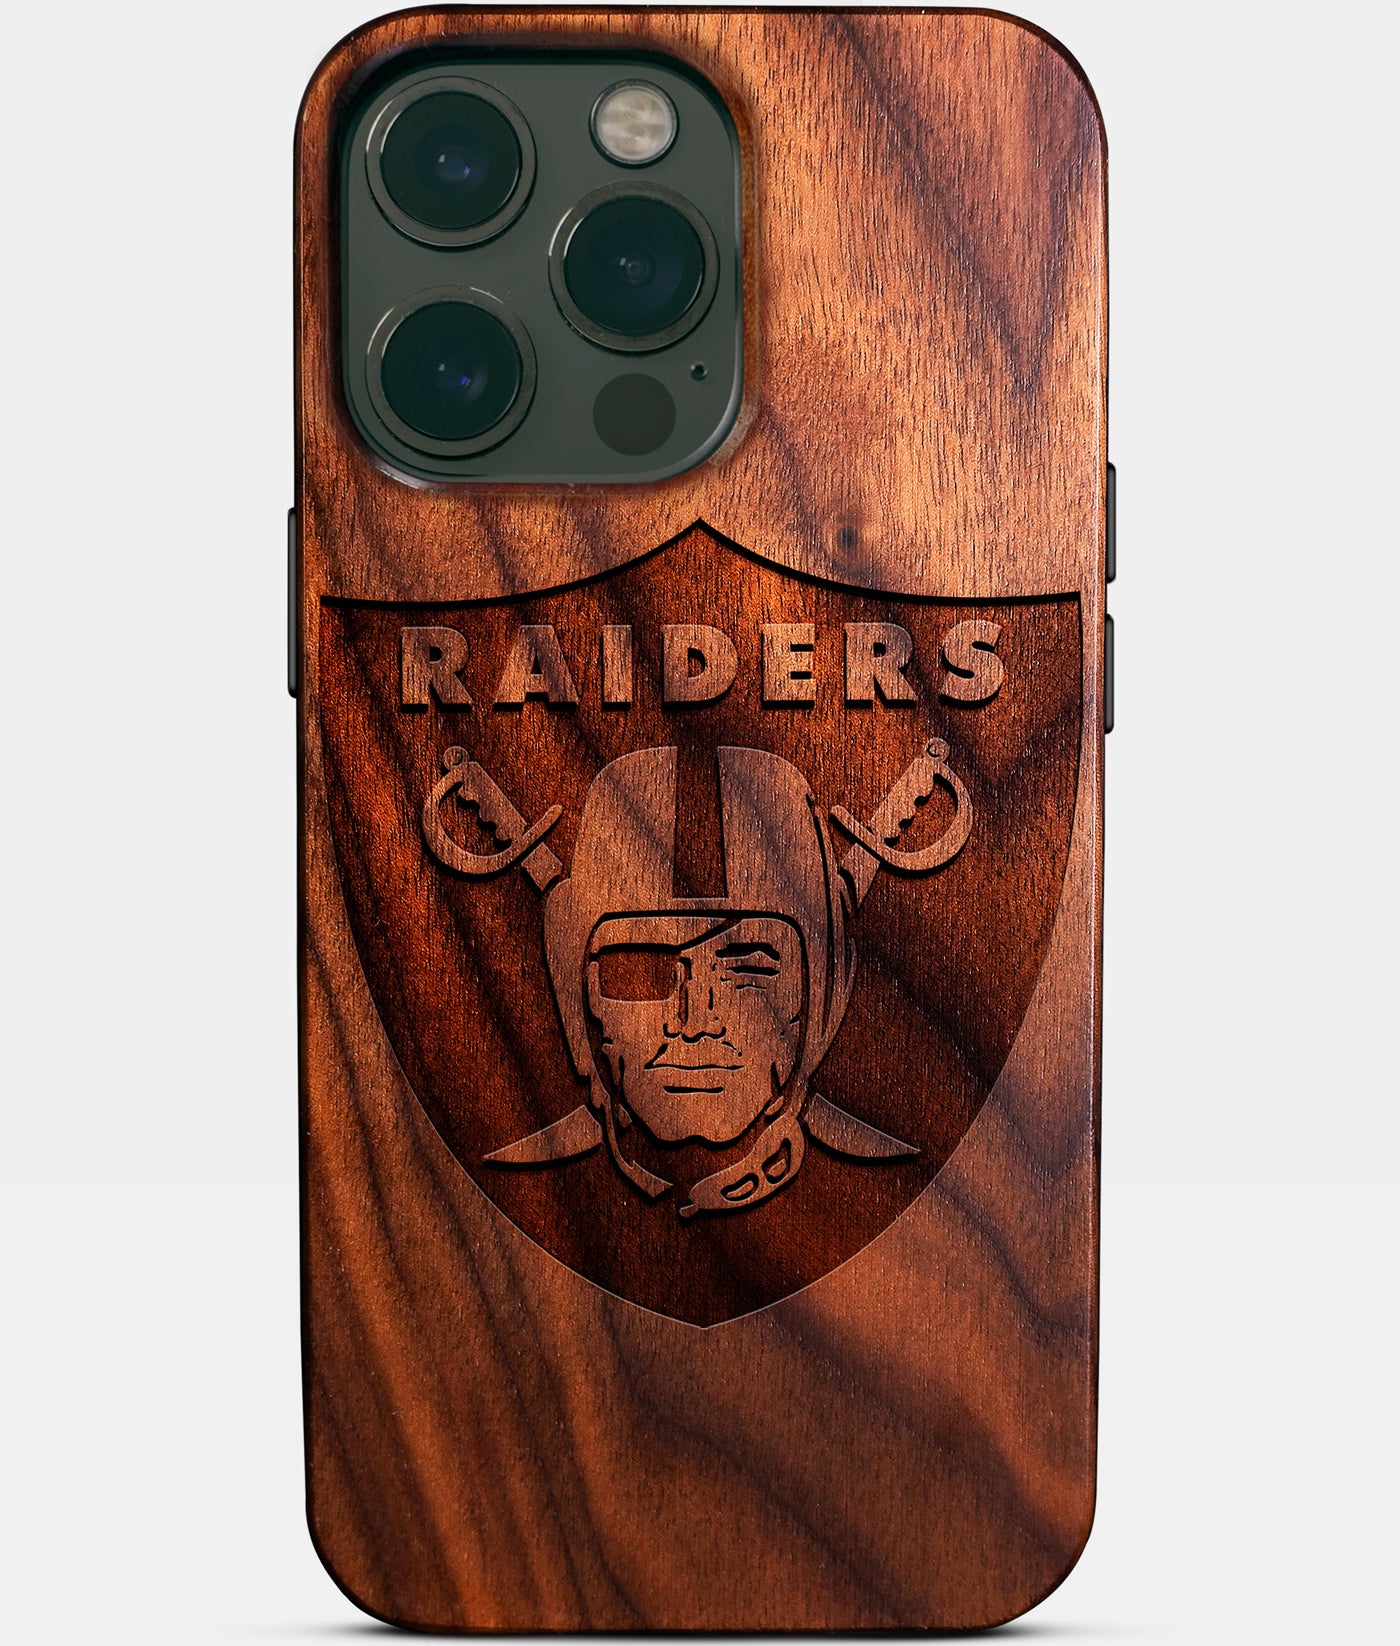 Custom Las Vegas Raiders iPhone 14 Pro Max Case - Carved Wood Raiders Cover - Eco-friendly Las Vegas Raiders iPhone 14 Pro Max Case - Custom Las Vegas Raiders Gift For Him - Monogrammed Personalized iPhone 14 Pro Max Cover By Engraved In Nature